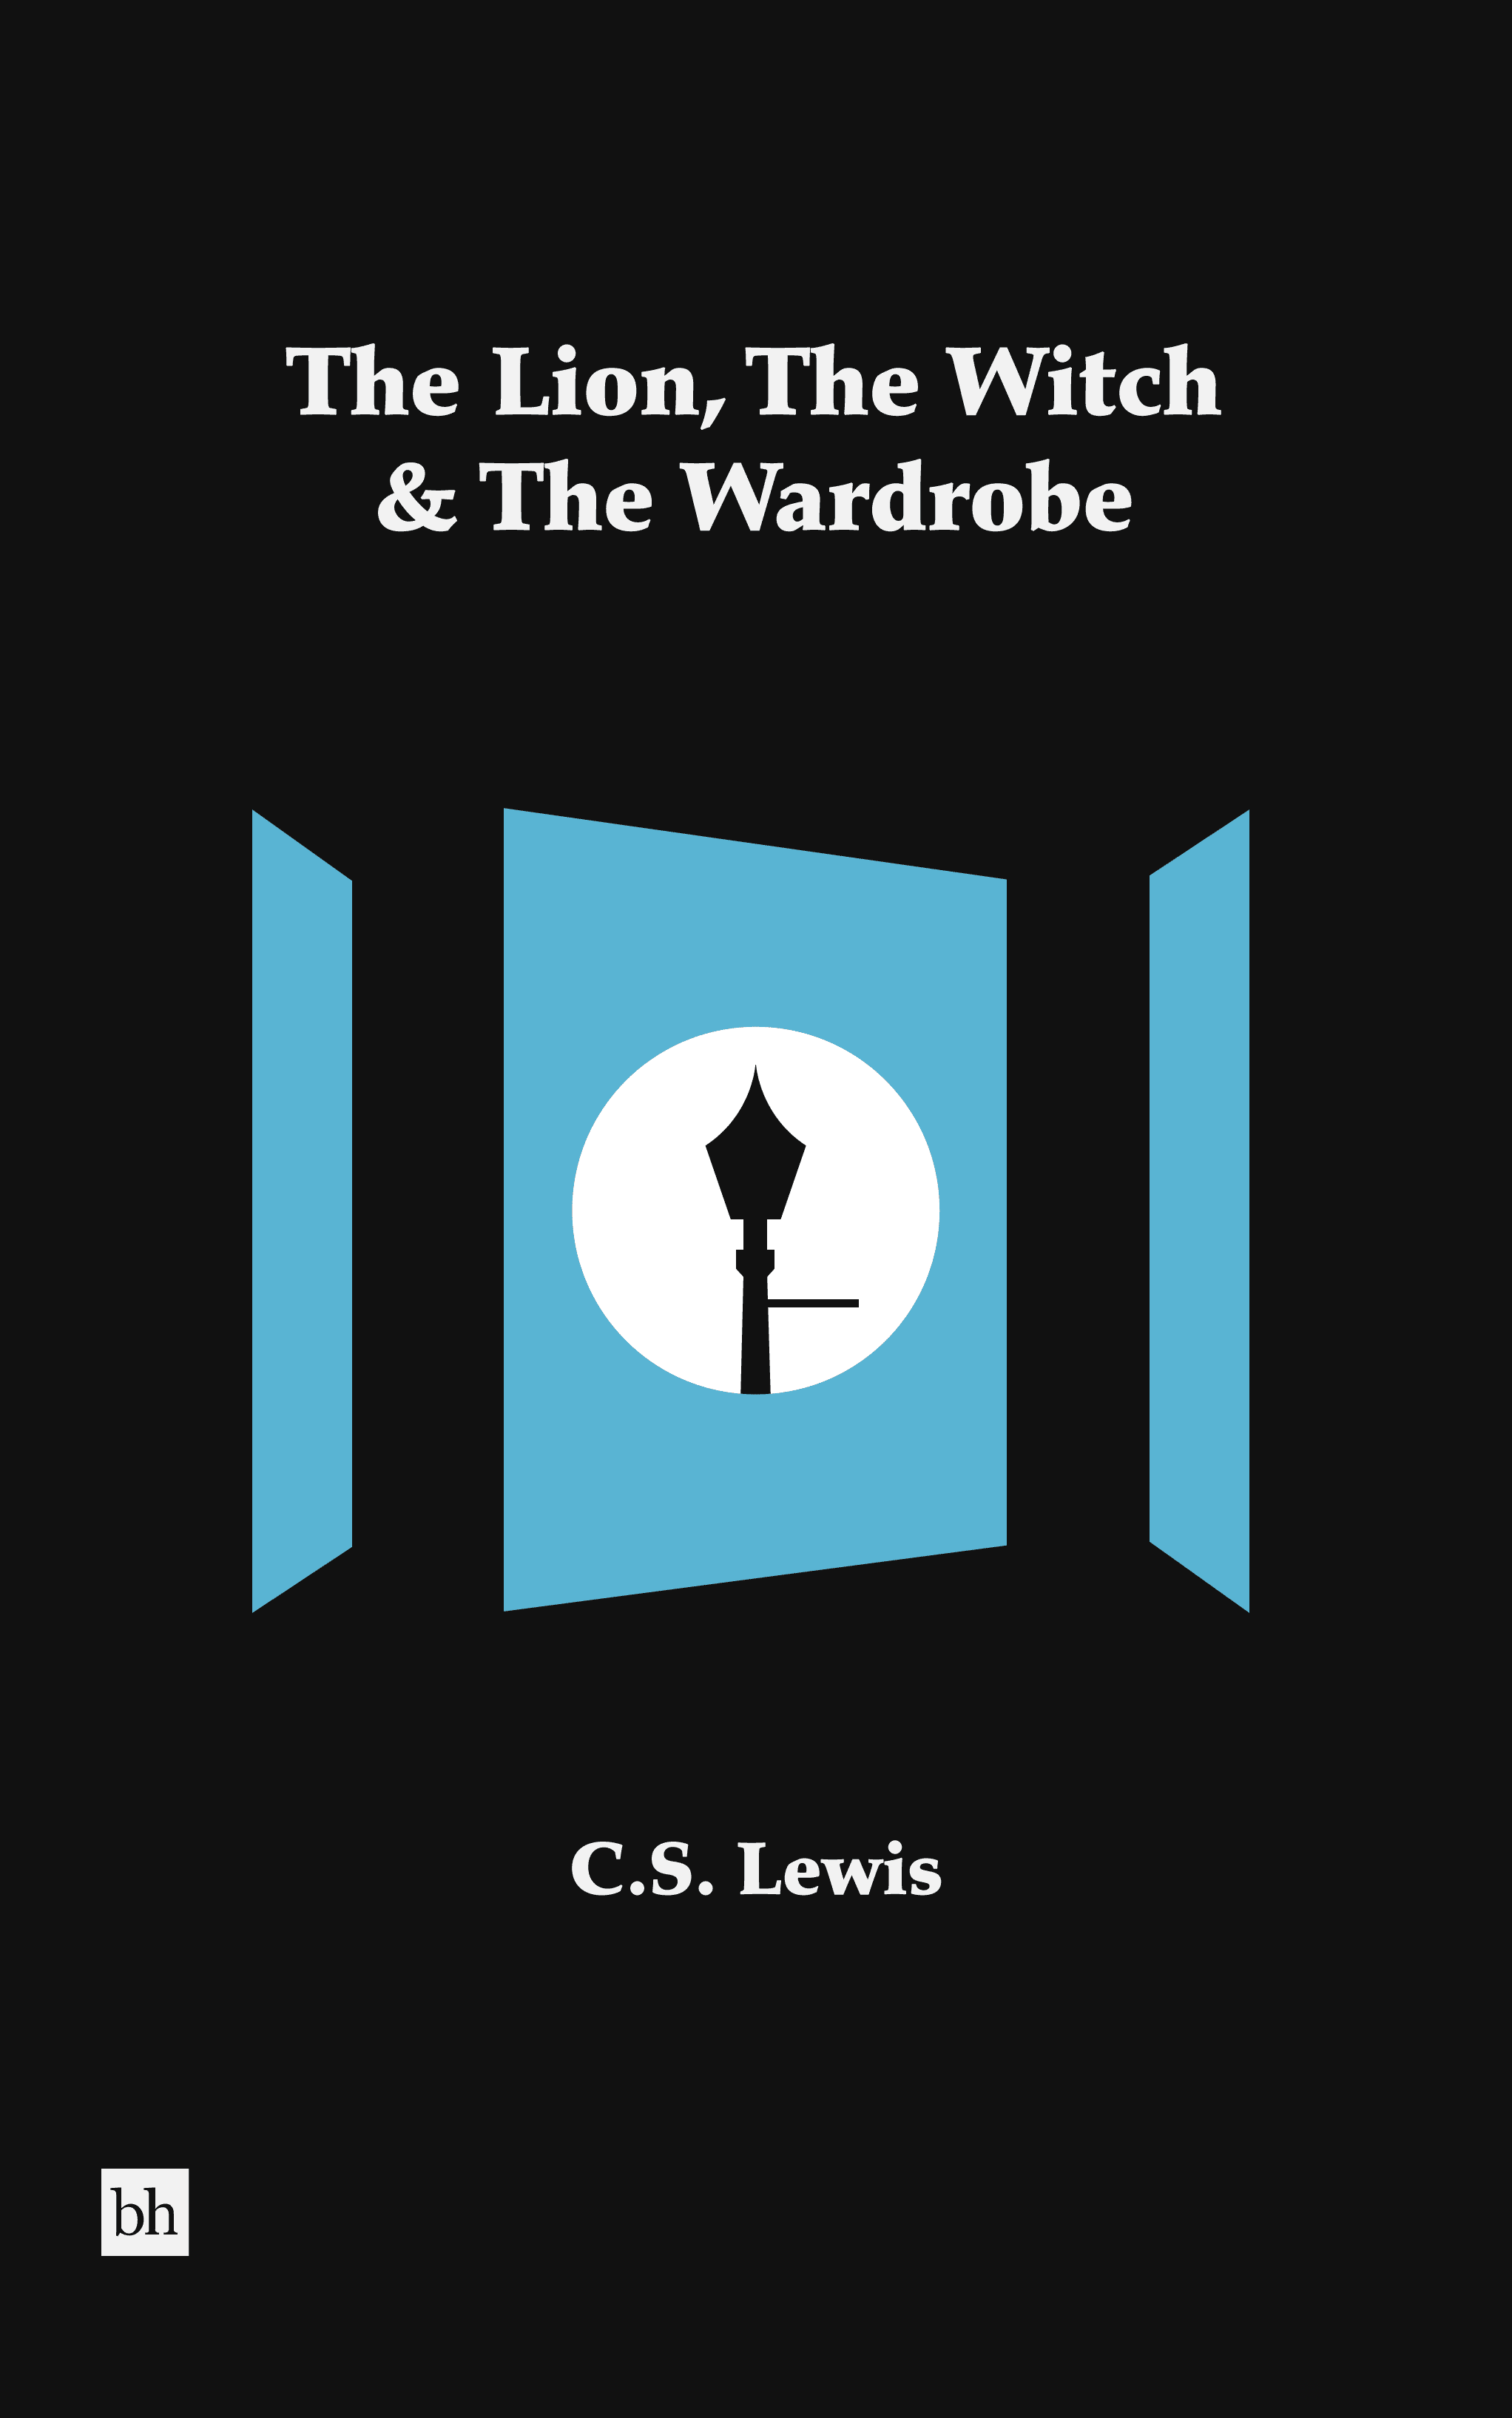 The Lion, The Witch and The Wardrobe by C.S. Lewis